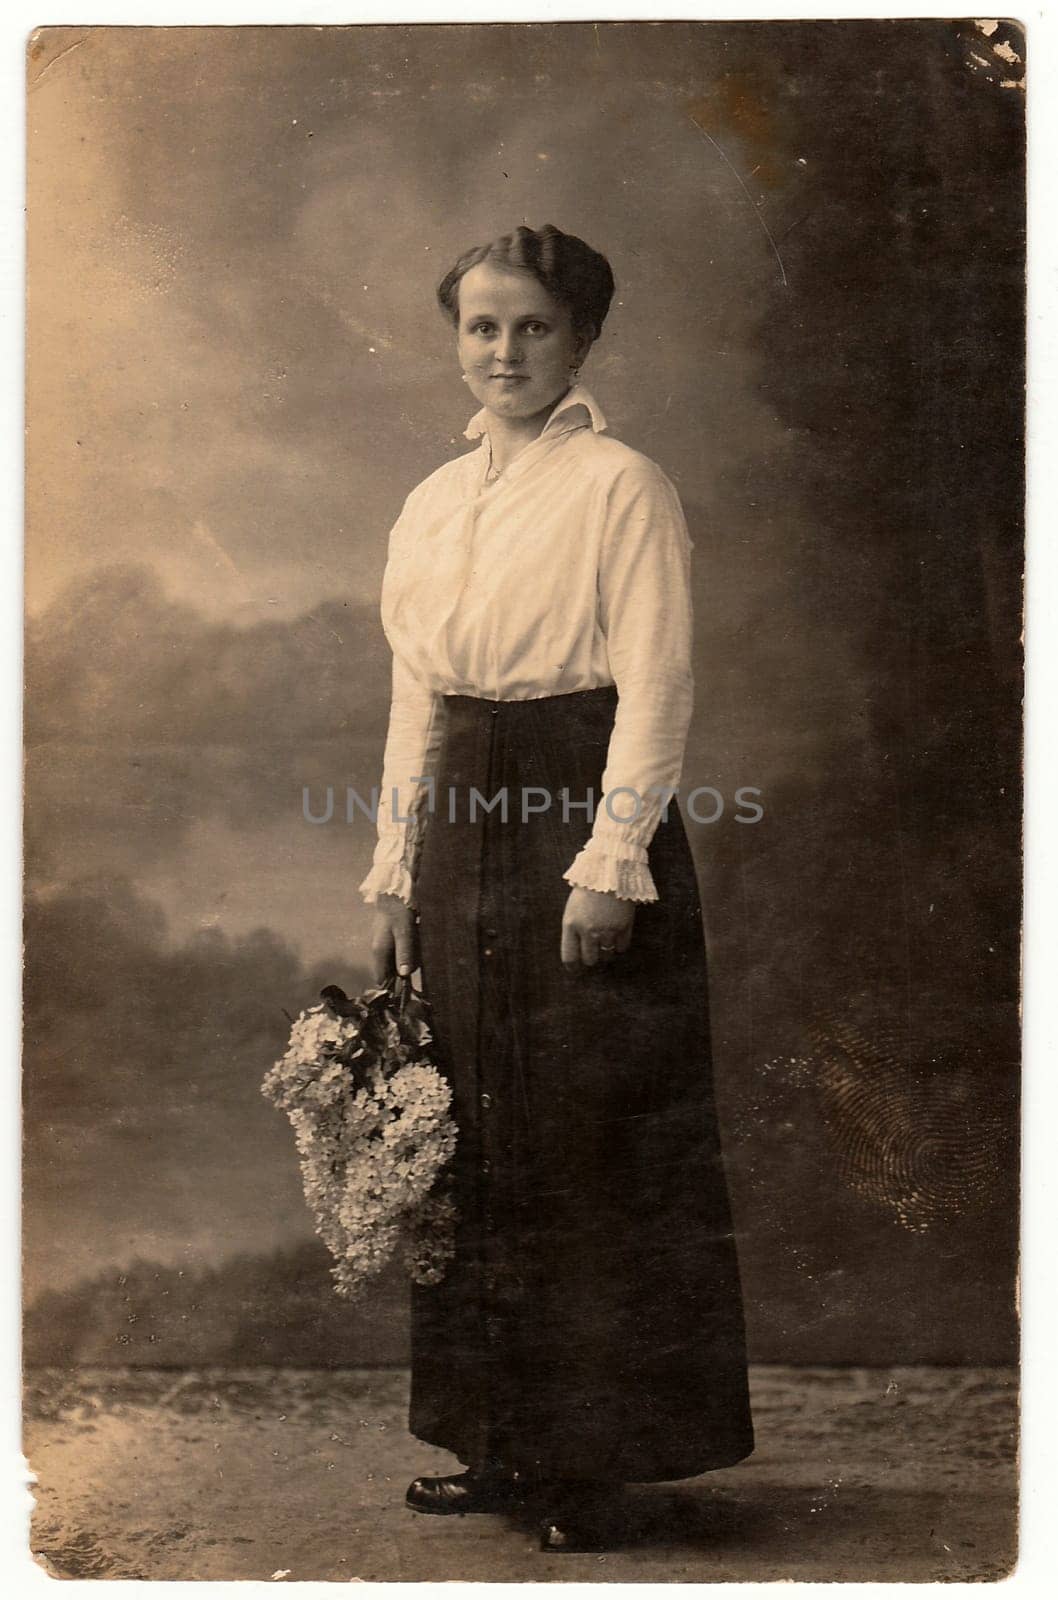 SOLINGEN, GERMANY - CIRCA 1920s: Vintage photo shows woman holds a bunch of lilac. Black white photo with sepia tint.